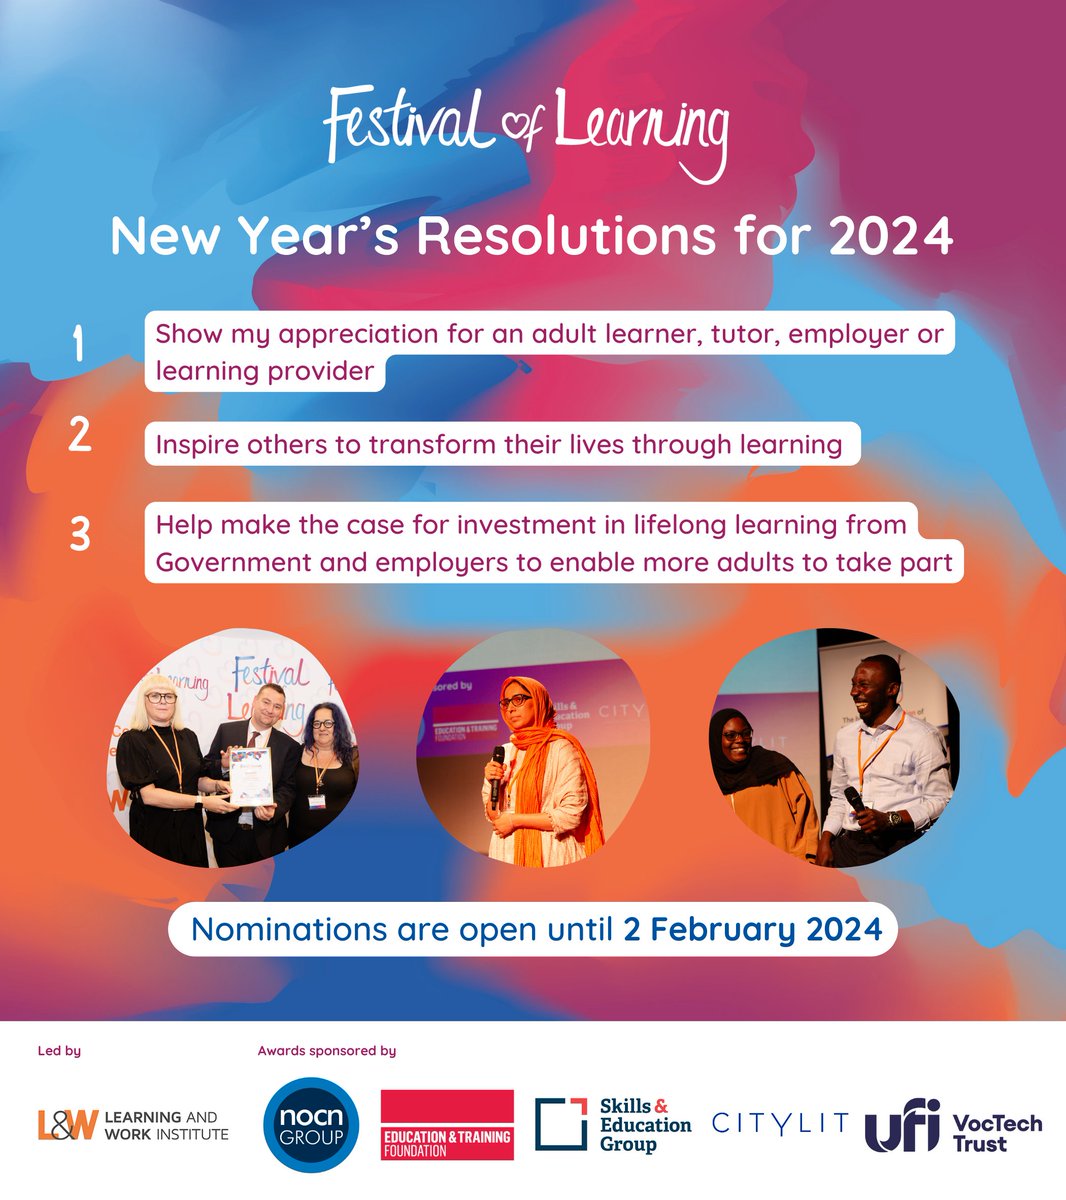 Happy 2024 from @festival_learn! 🌟 Looking for New Year’s resolutions? Why not make one submitting a nomination for #FestivalofLearning2024 – and recognising the achievements of a learner, tutor, provider or employer? Find out more: festivaloflearning.org.uk/home/nominate-… ✍️